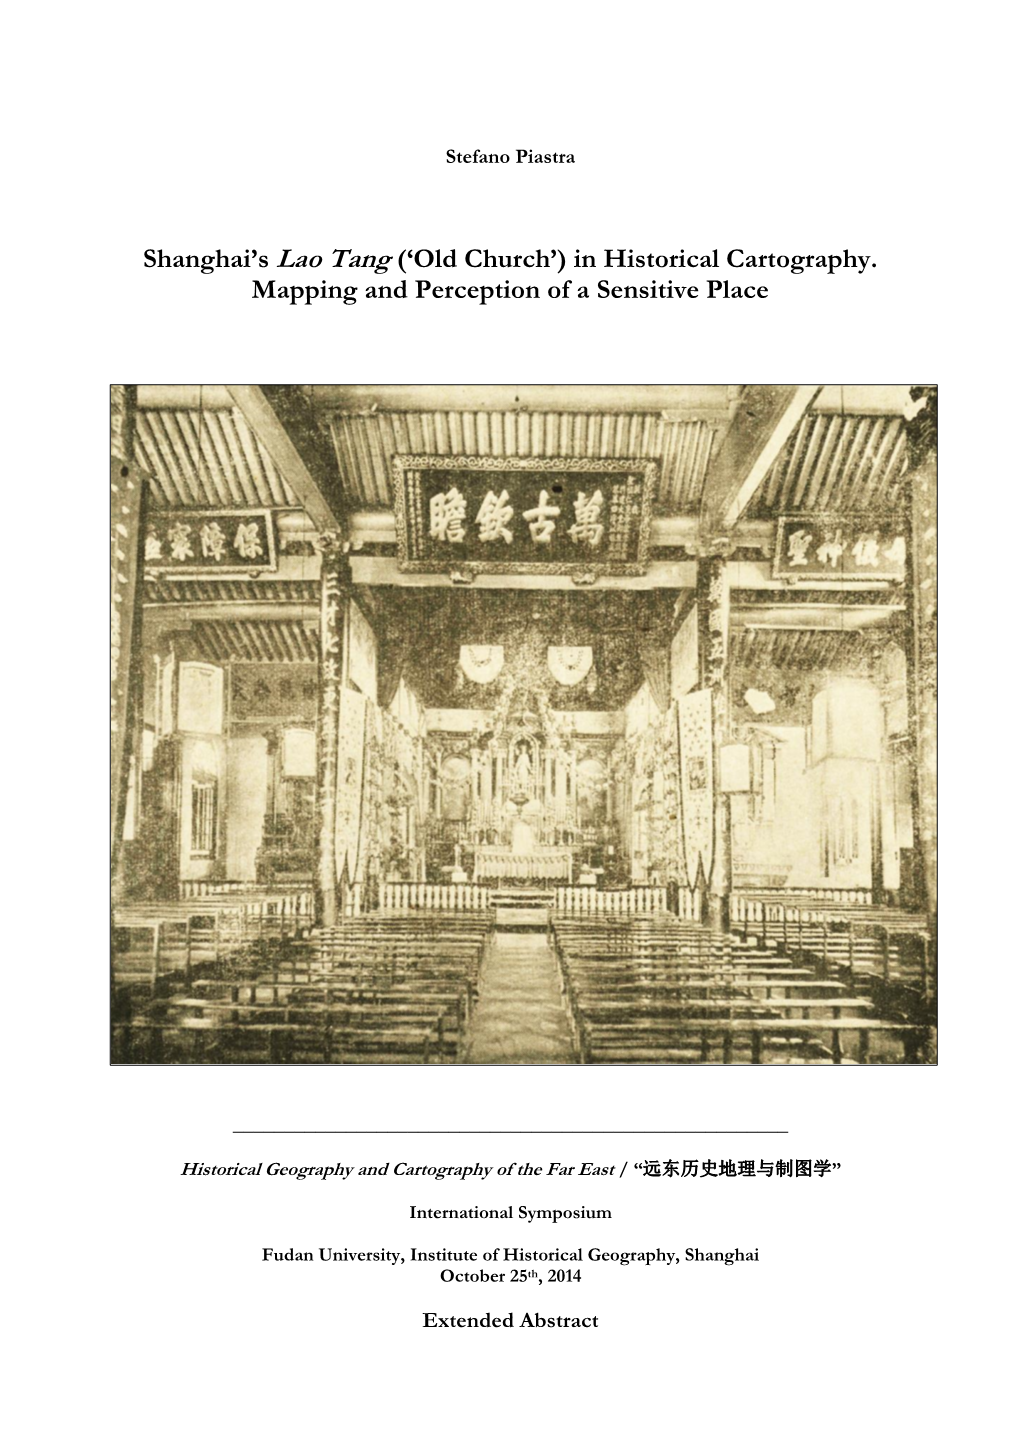 Shanghai's Lao Tang ('Old Church') in Historical Cartography. Mapping